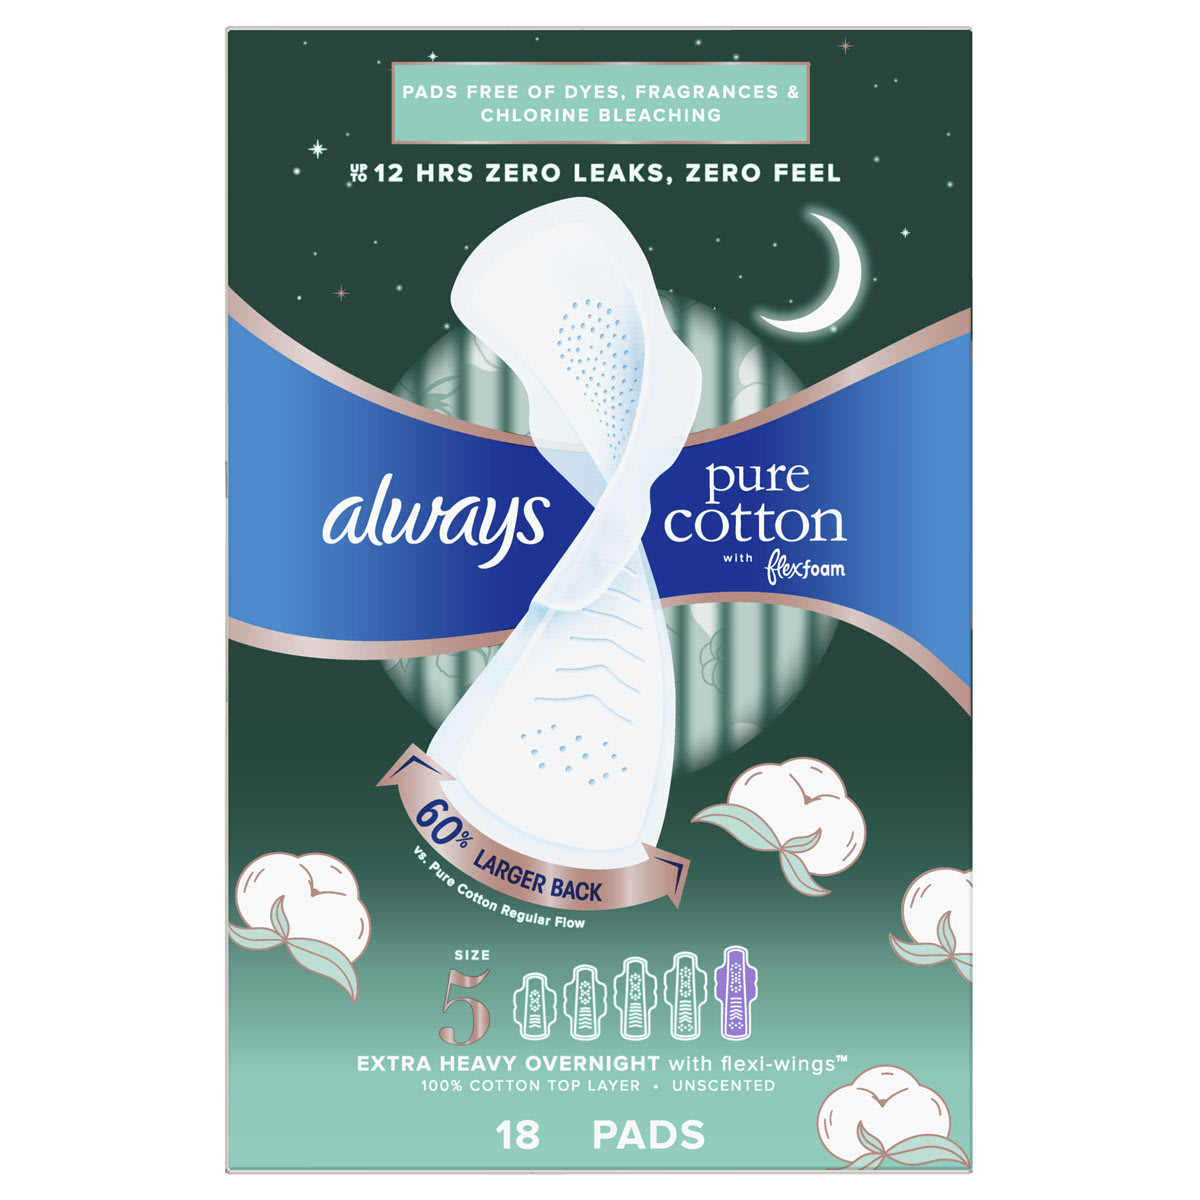 Always Zzz Pads Discontinued